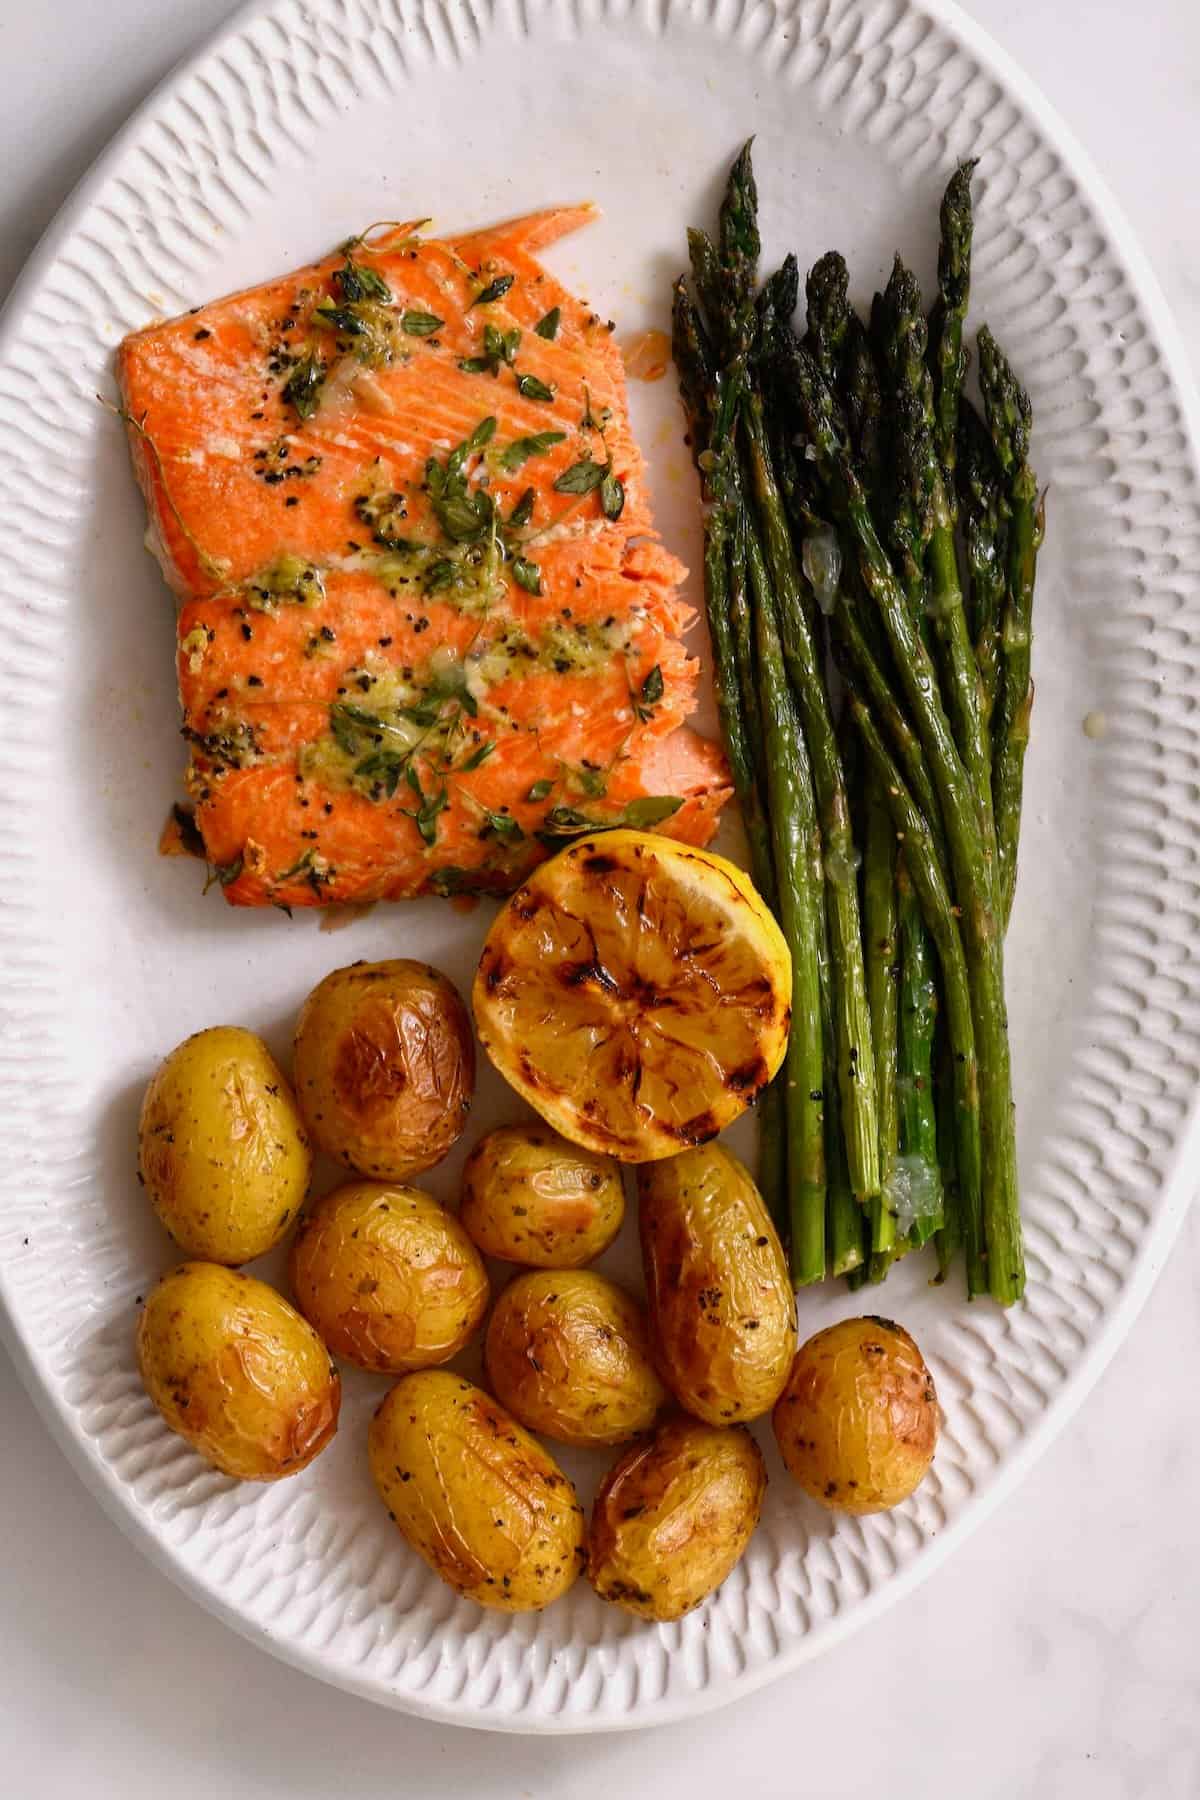 Oven roasted asparagus served with salmon and potatoes